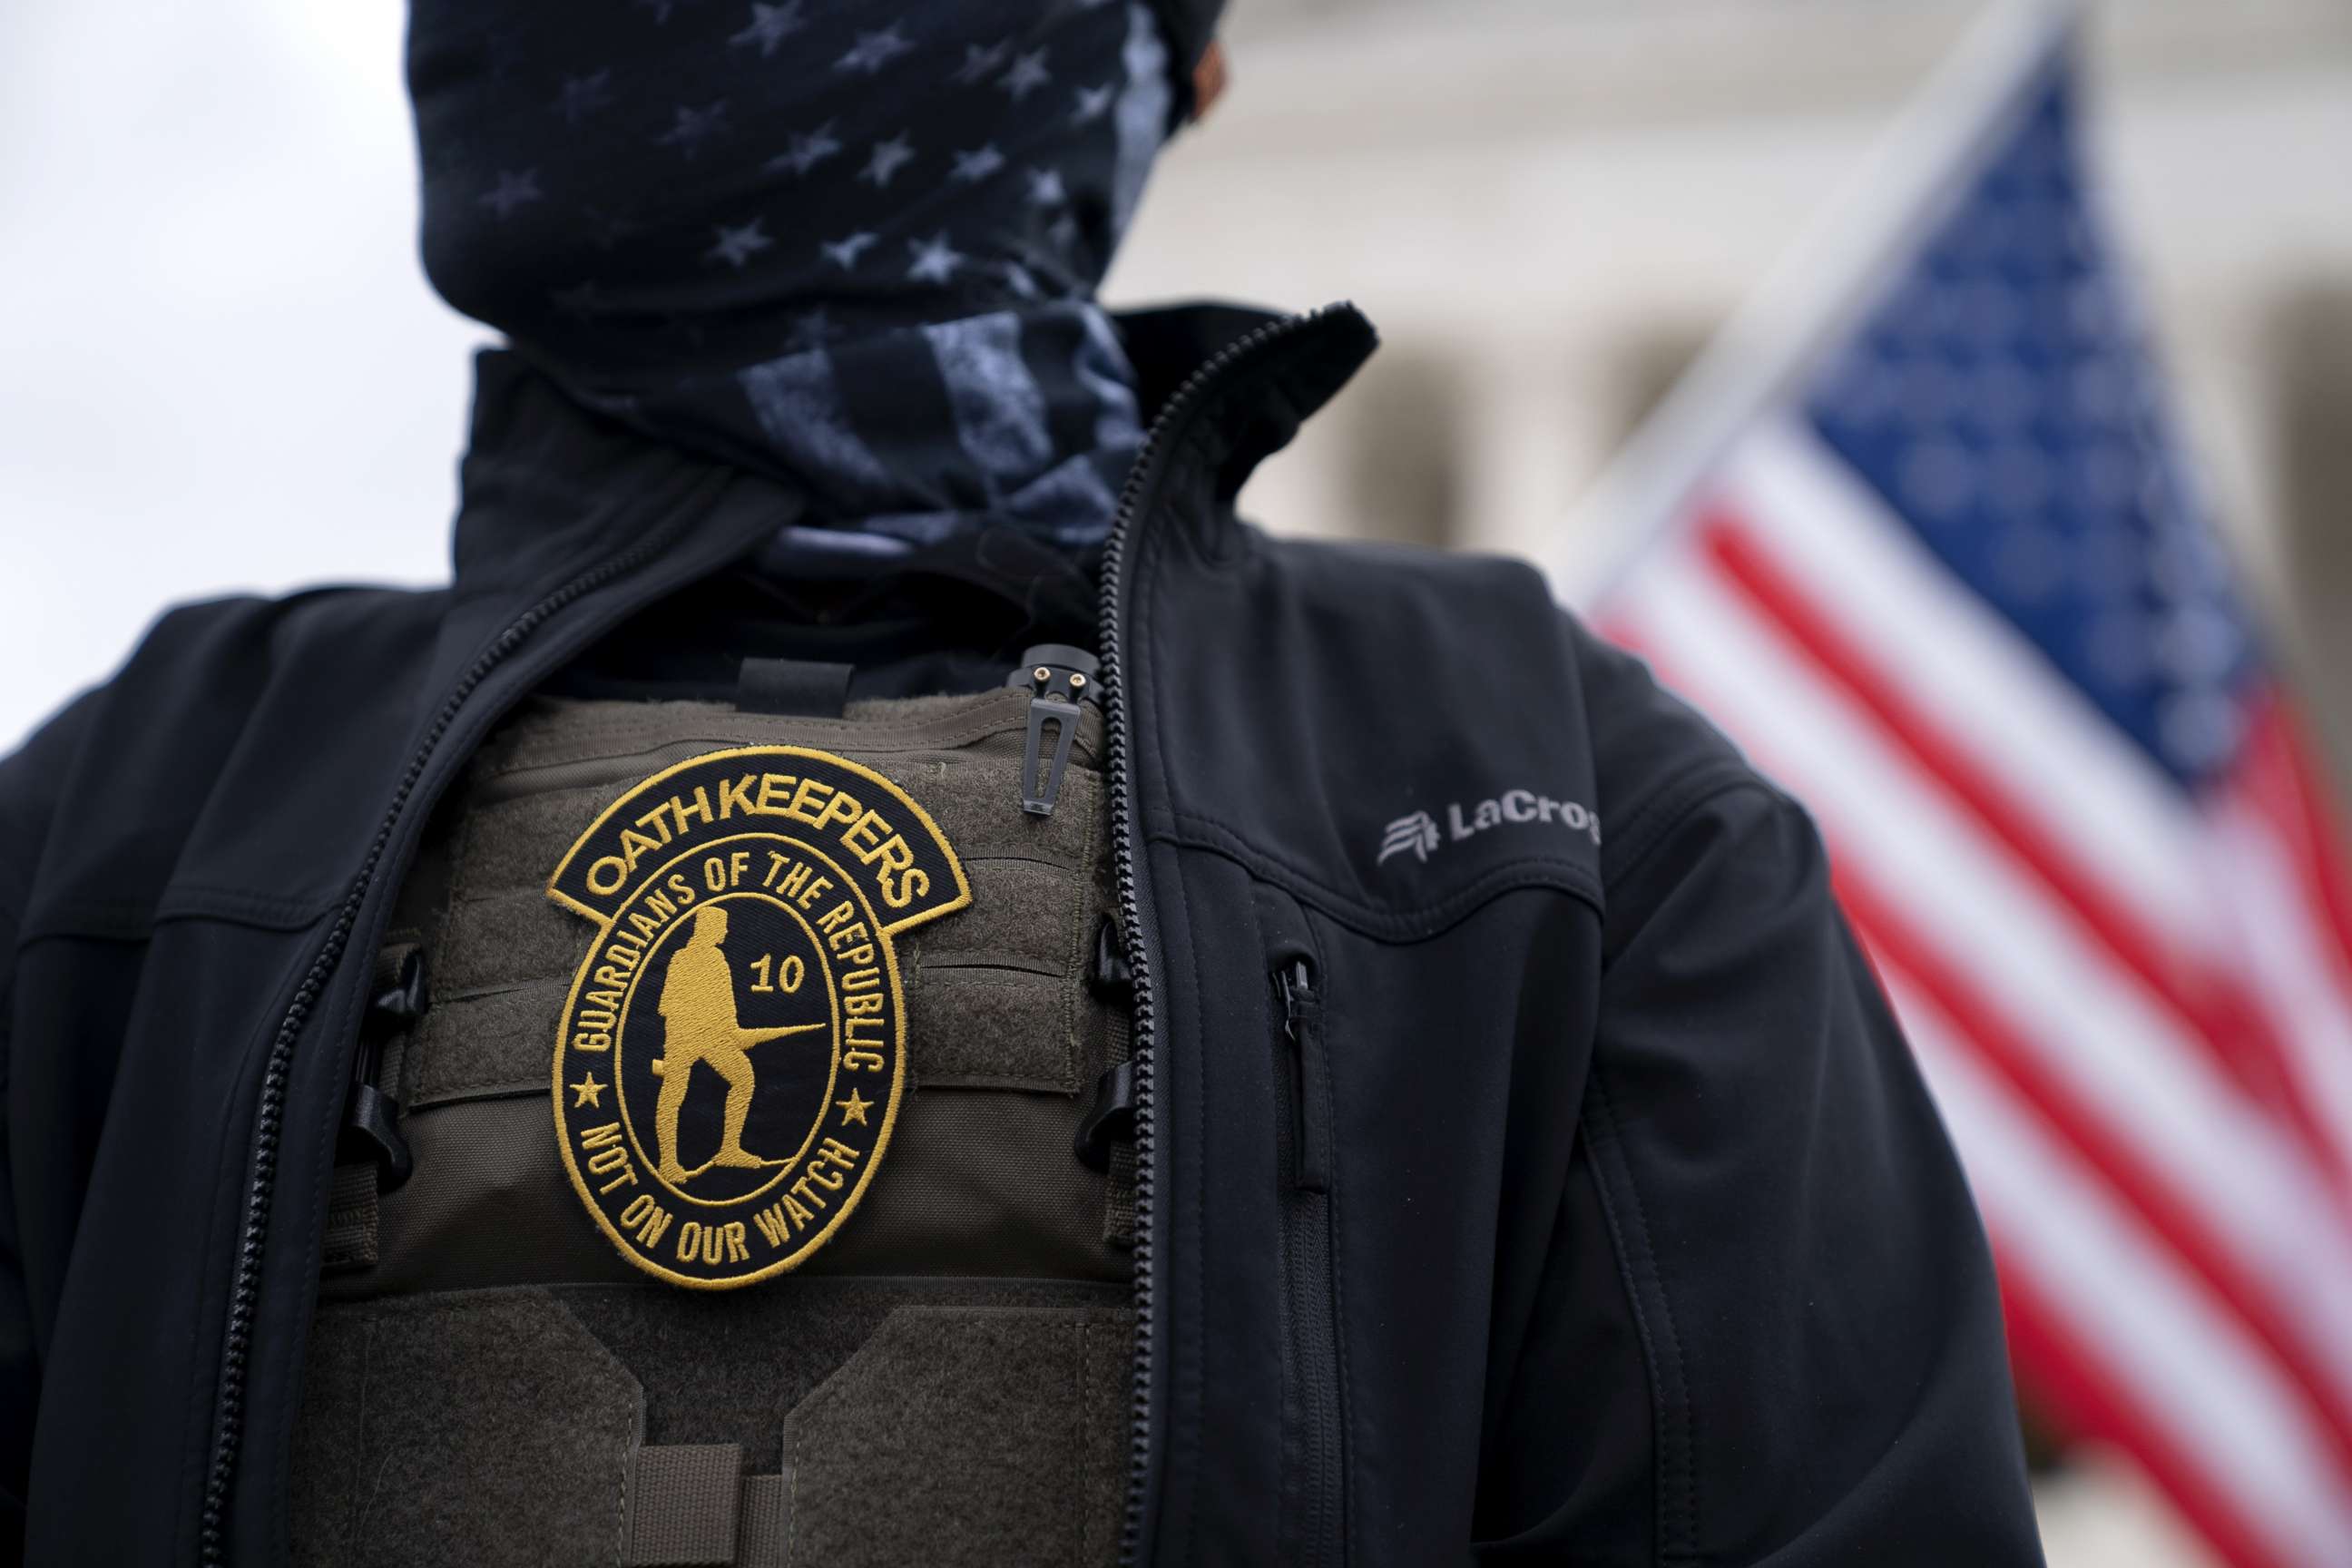 PHOTO: A demonstrator wears an Oath Keepers anti-government organization badge on a protective vest during a protest outside the Supreme Court in Washington, Jan. 5, 2021.